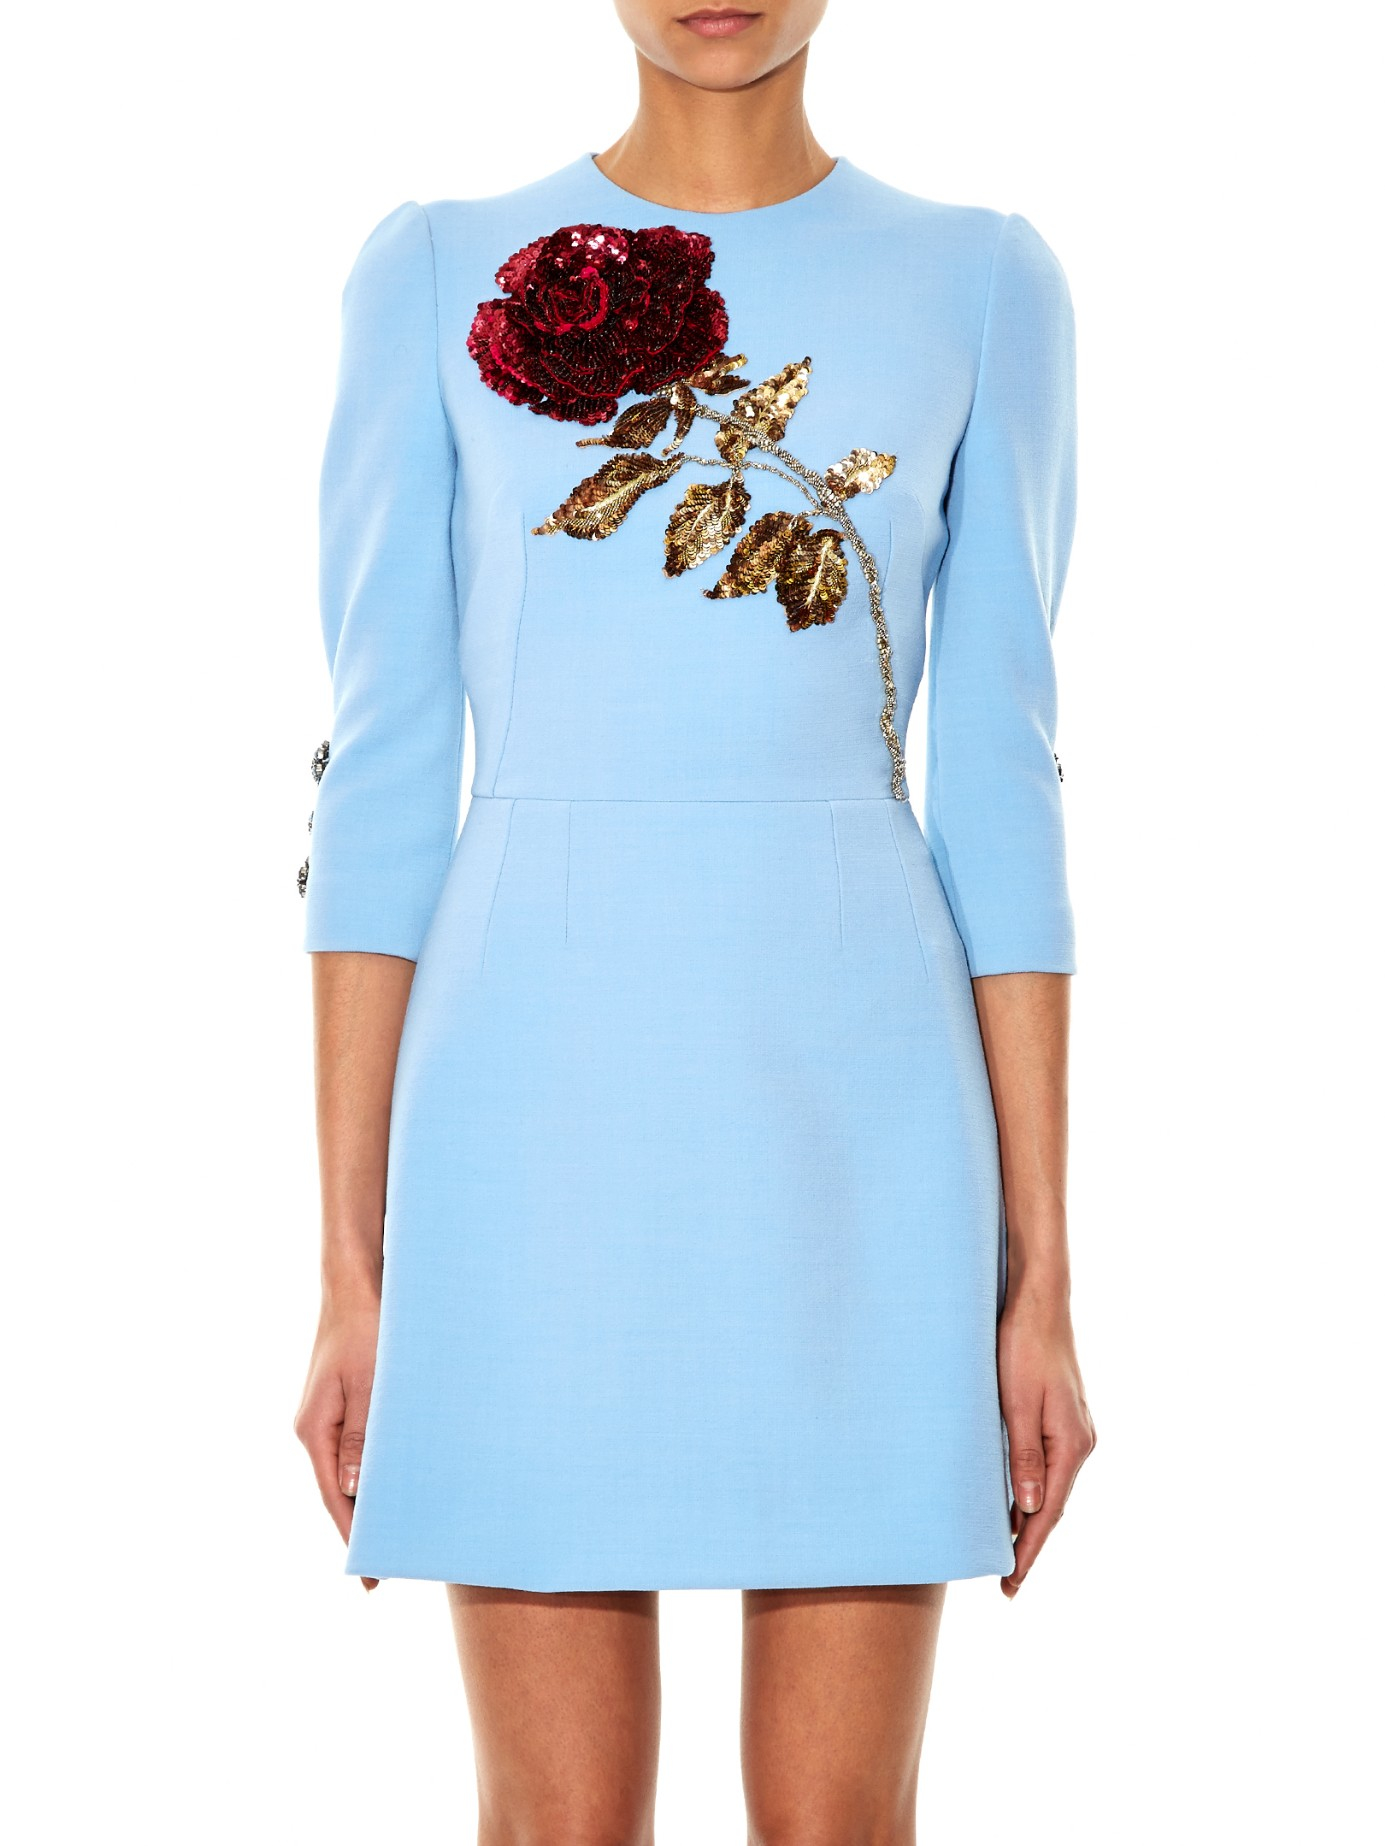 dolce and gabbana blue and white dress